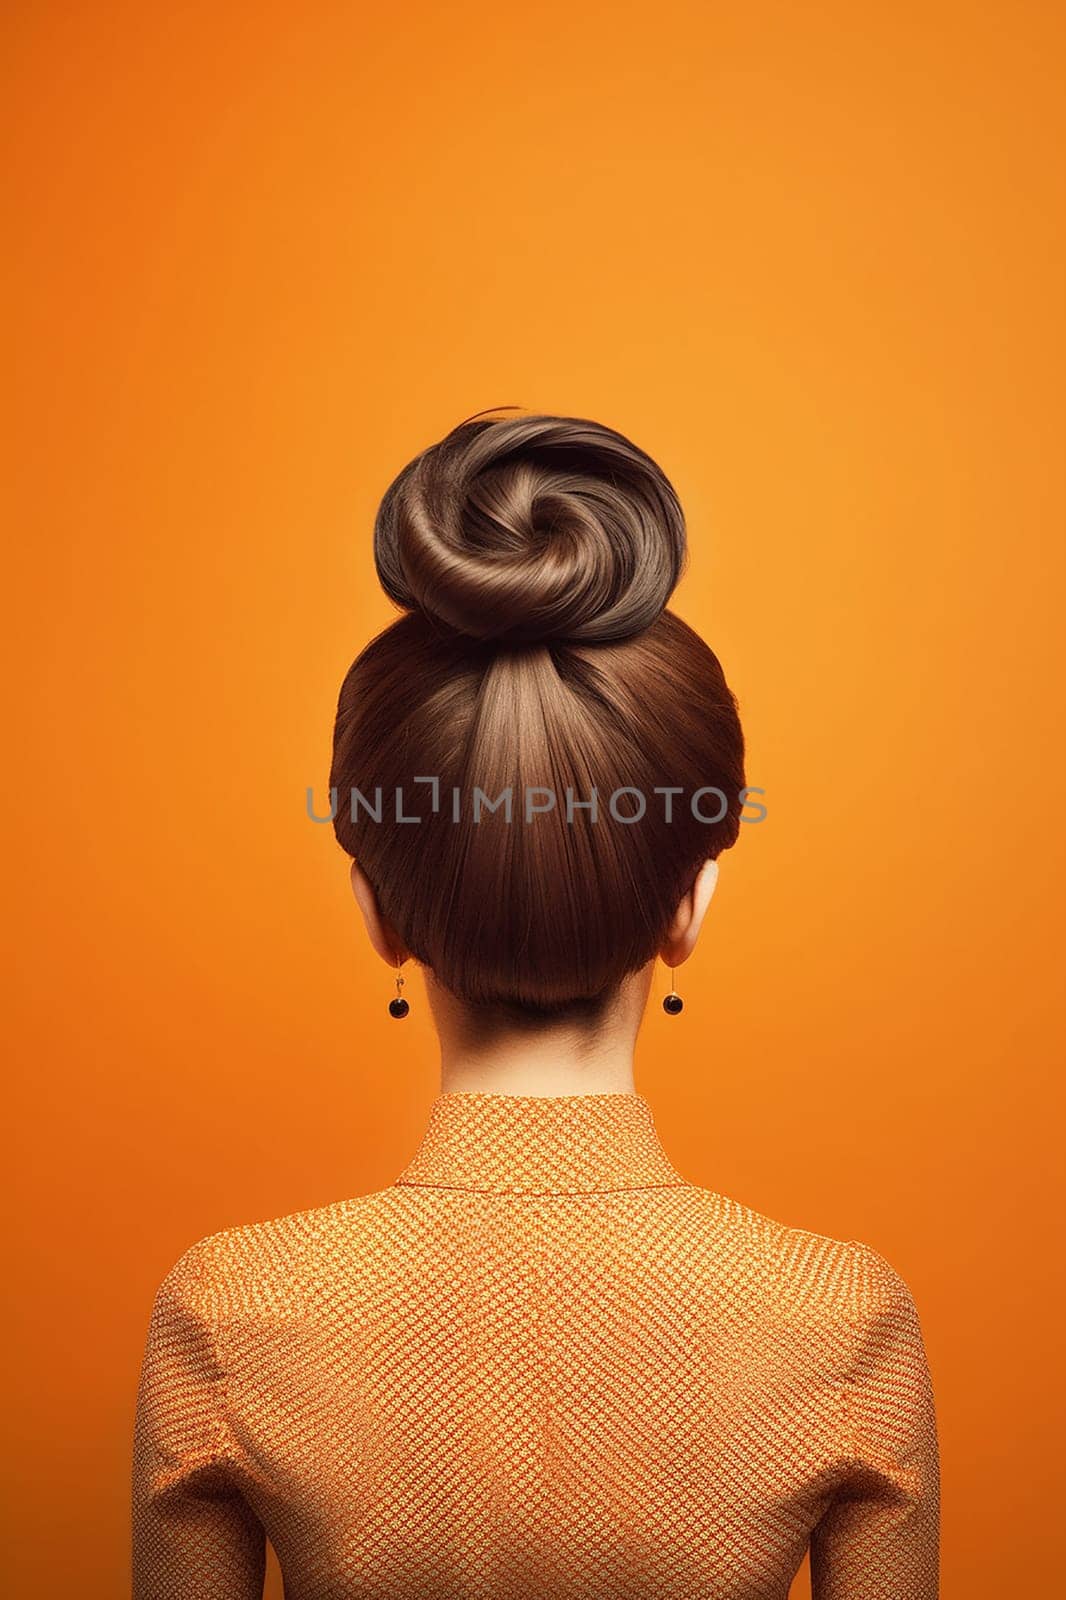 Woman with a stylish bun against an orange background